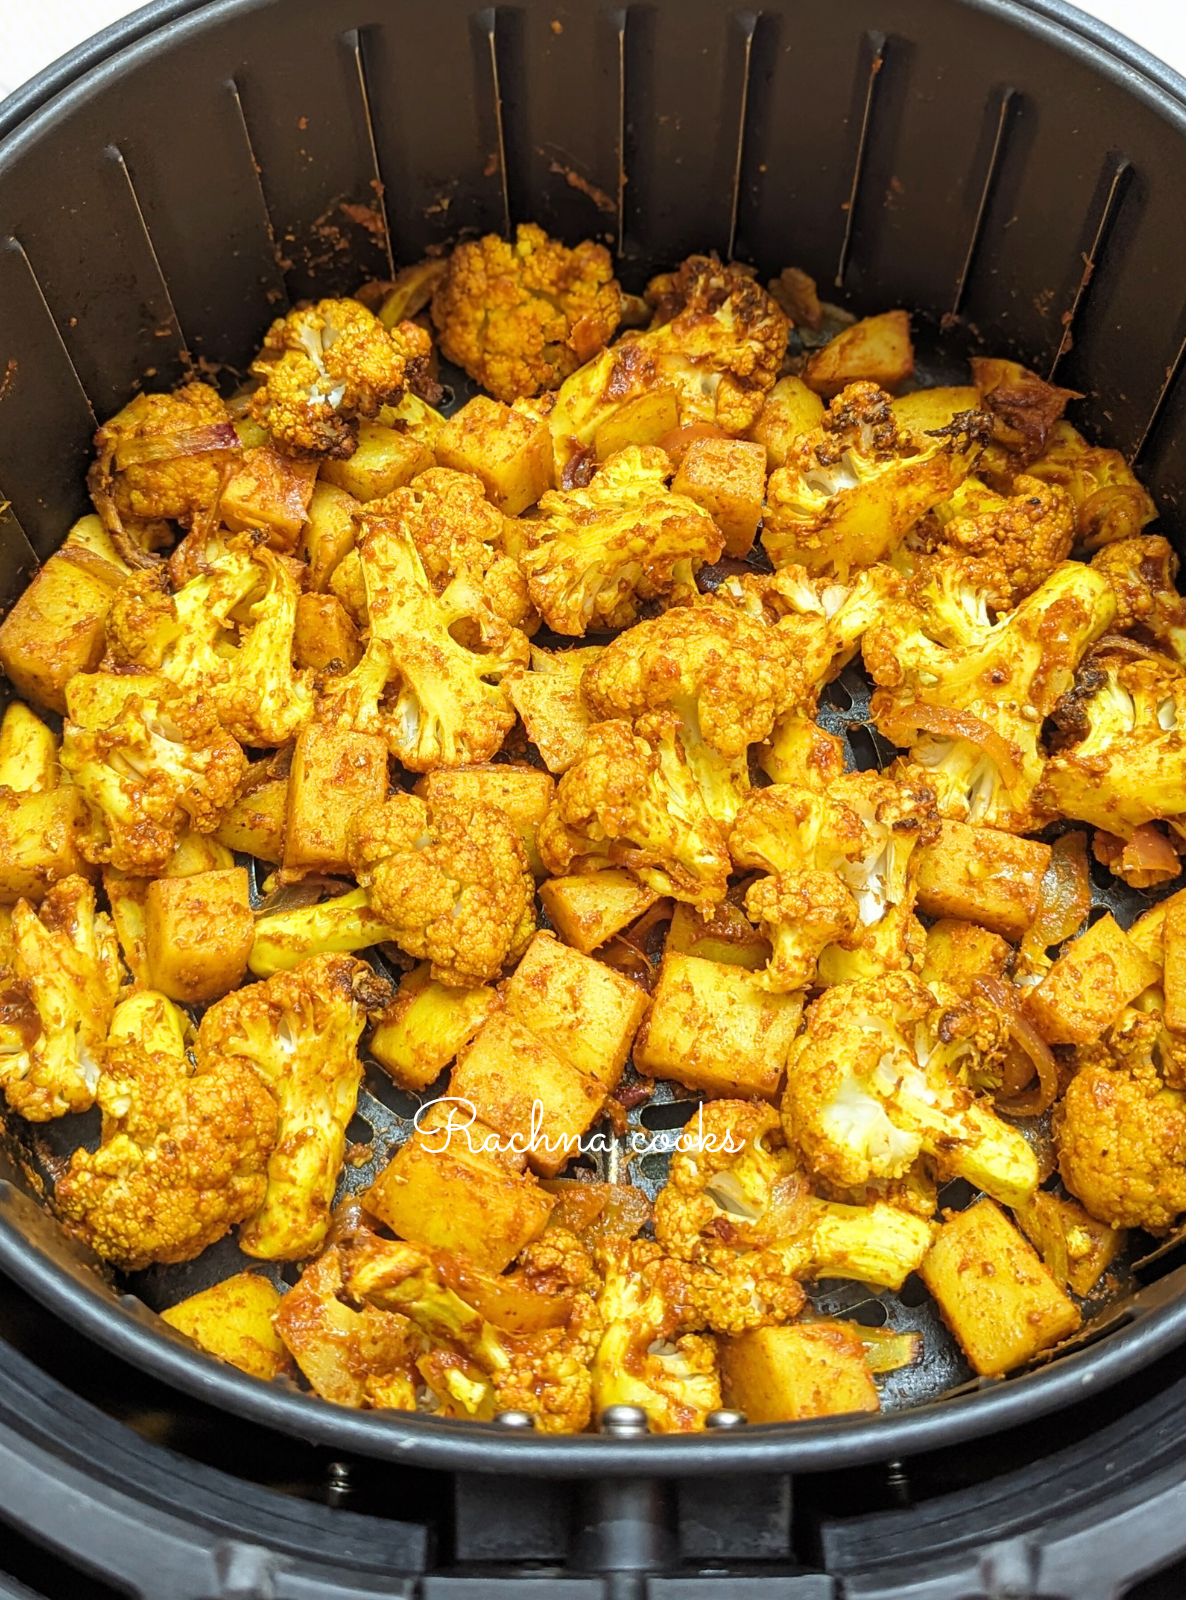 Aloo gobhi after air frying in air fryer basket.